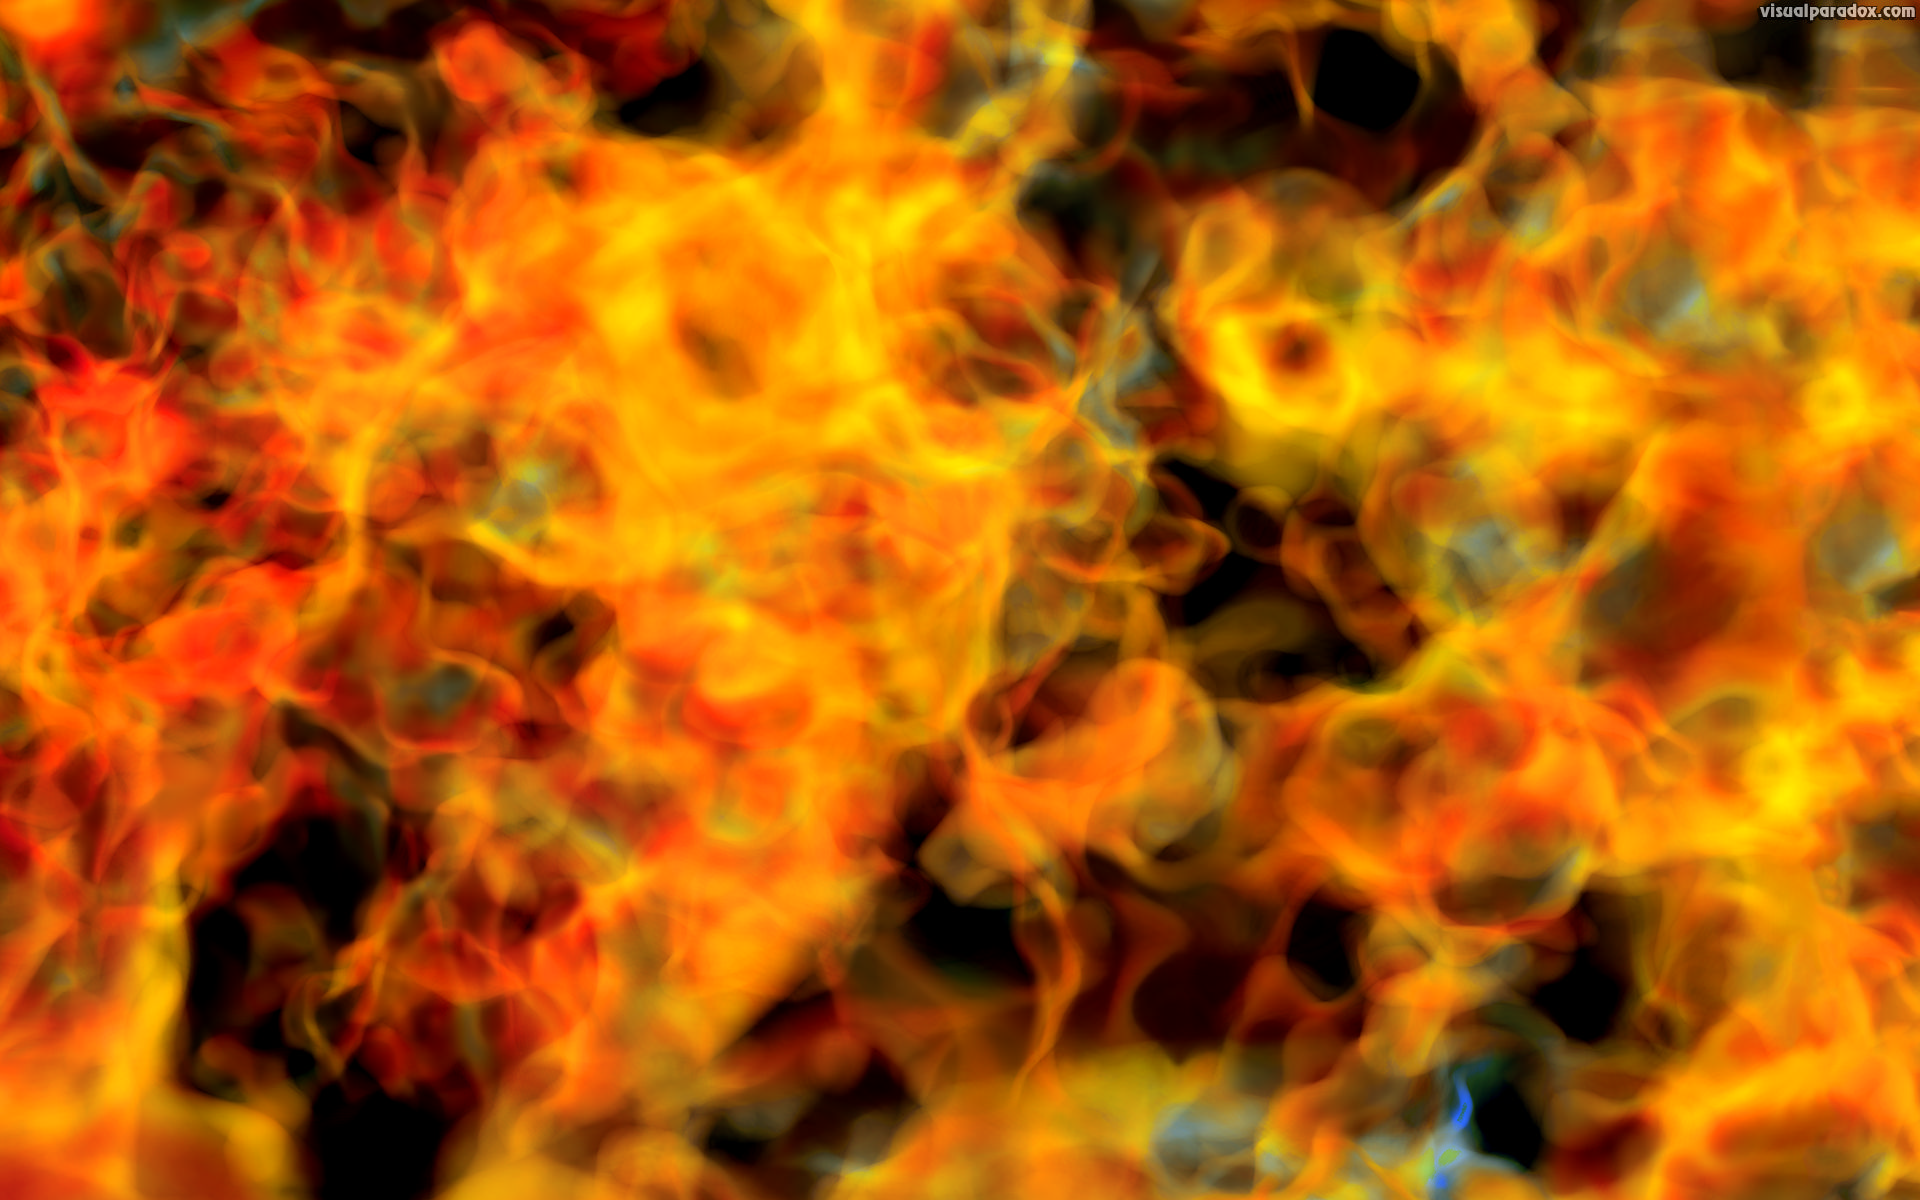 fire, flame, hot, heat, burn, combust, combustion, hell, hades, inferno, conflagration, char, scorch, incinerate, 3d, wallpaper